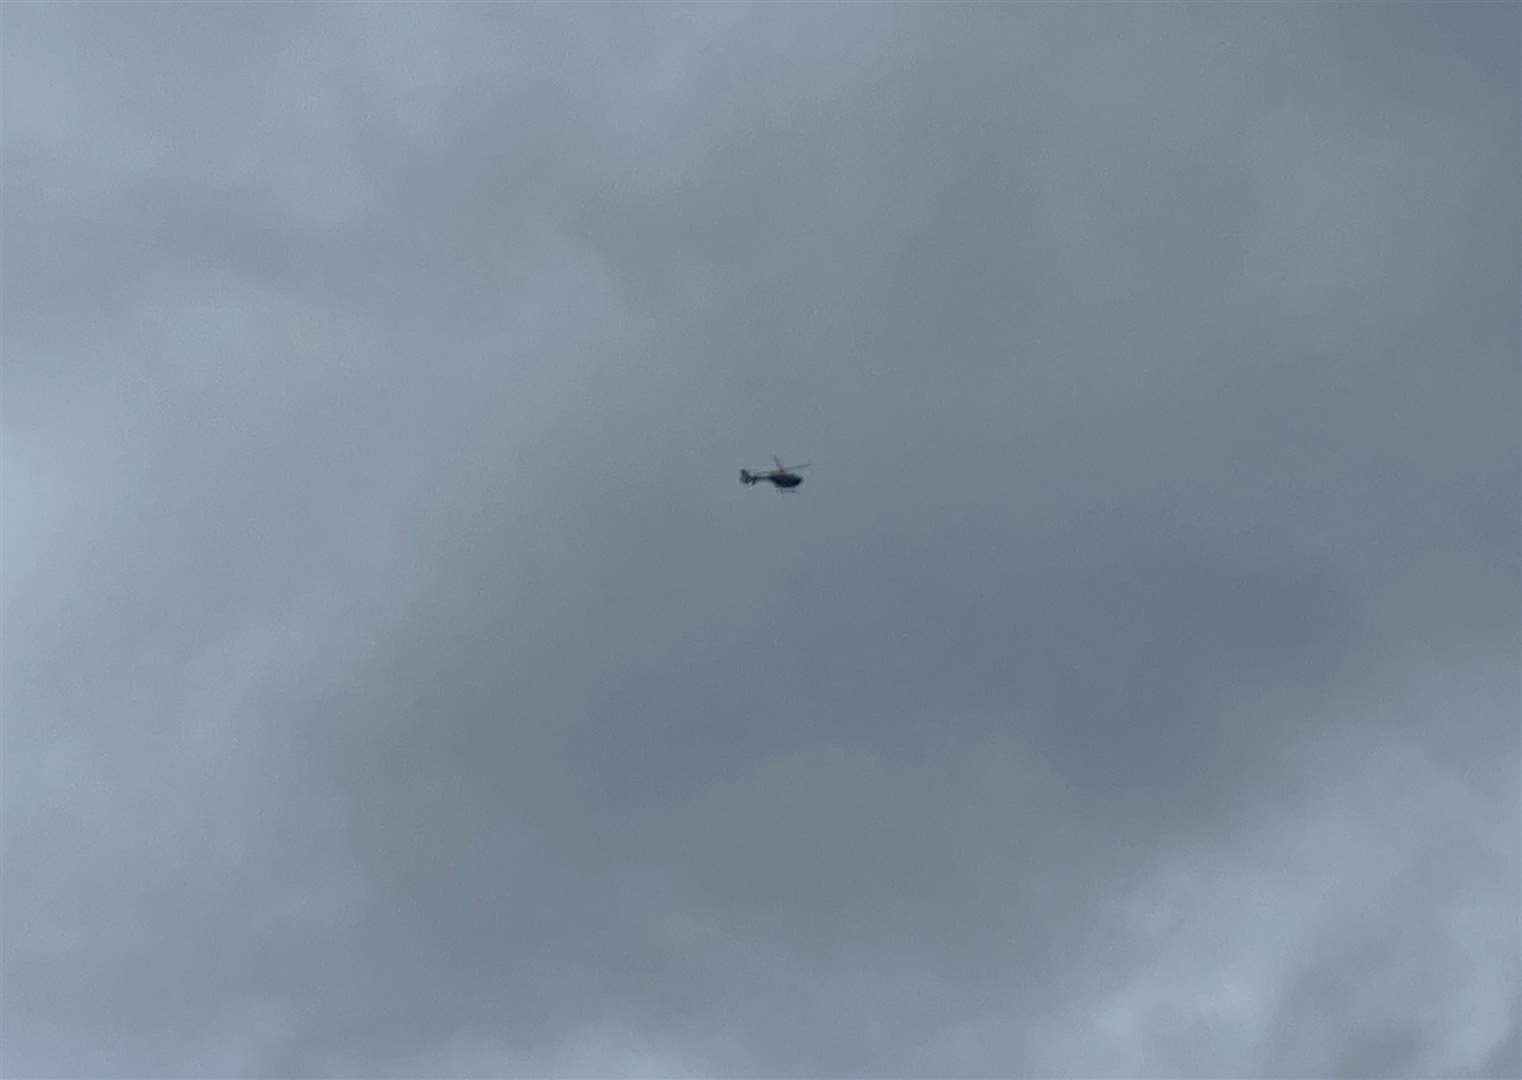 A police helicopter has been spotted over Boughton